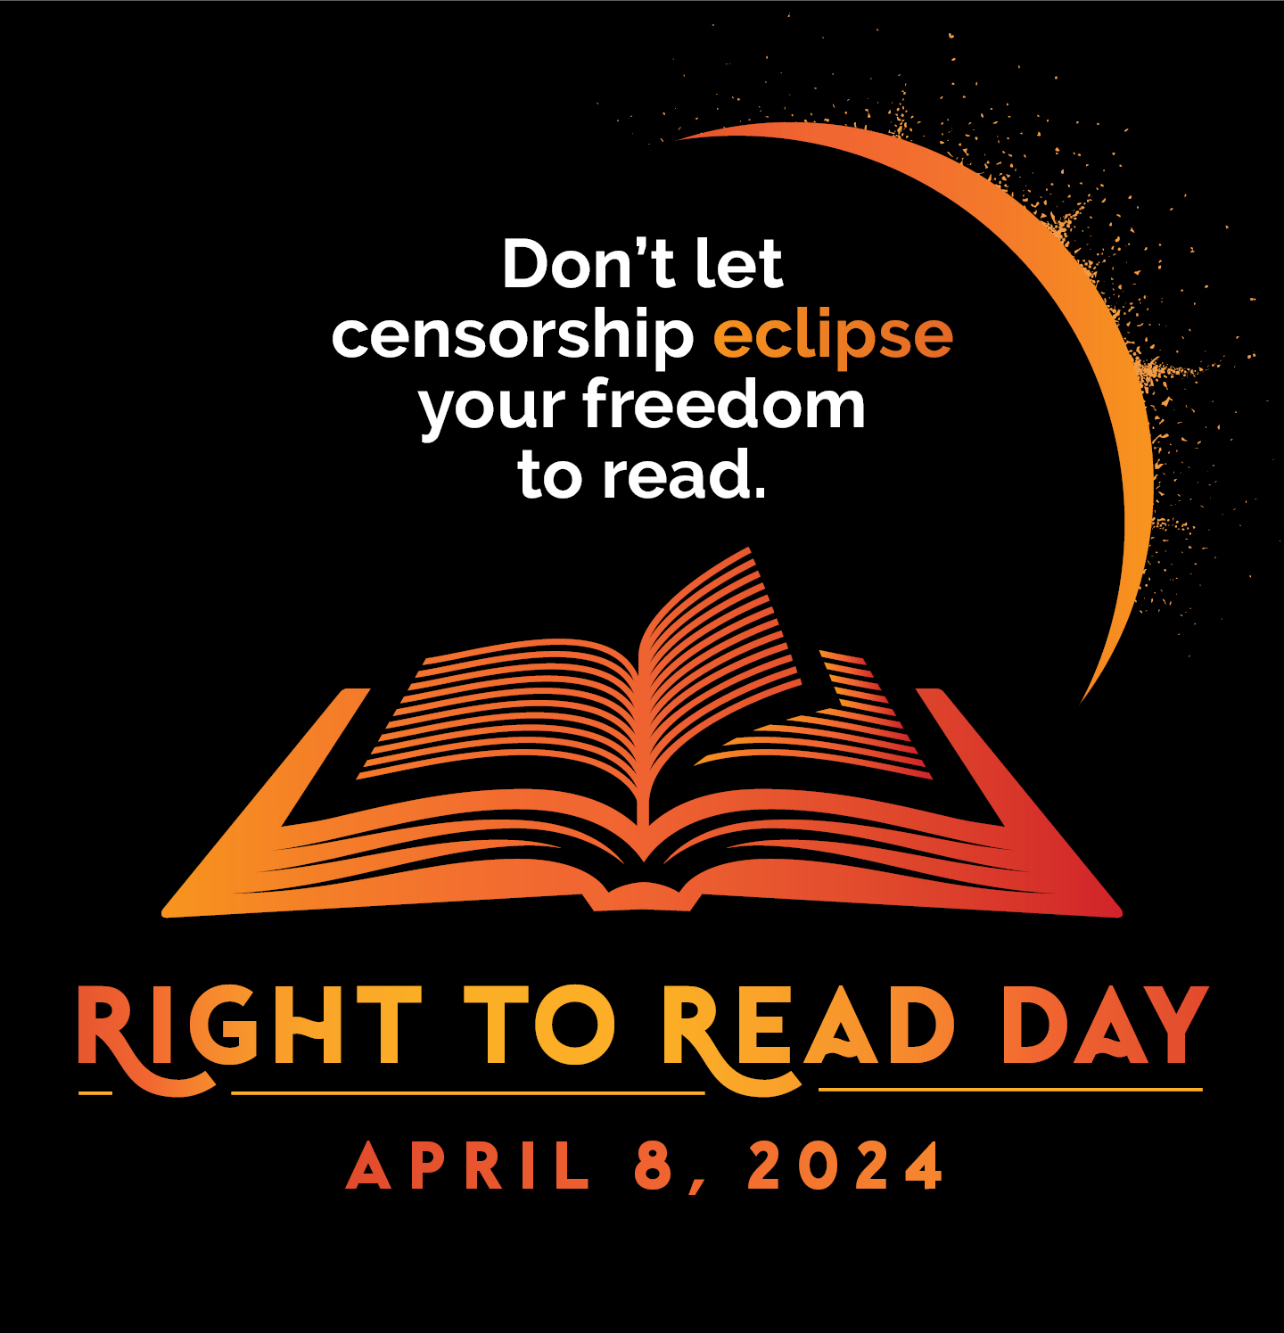 Don't let censorship eclipse your freedom to read. Right to Read Day April 8, 2024